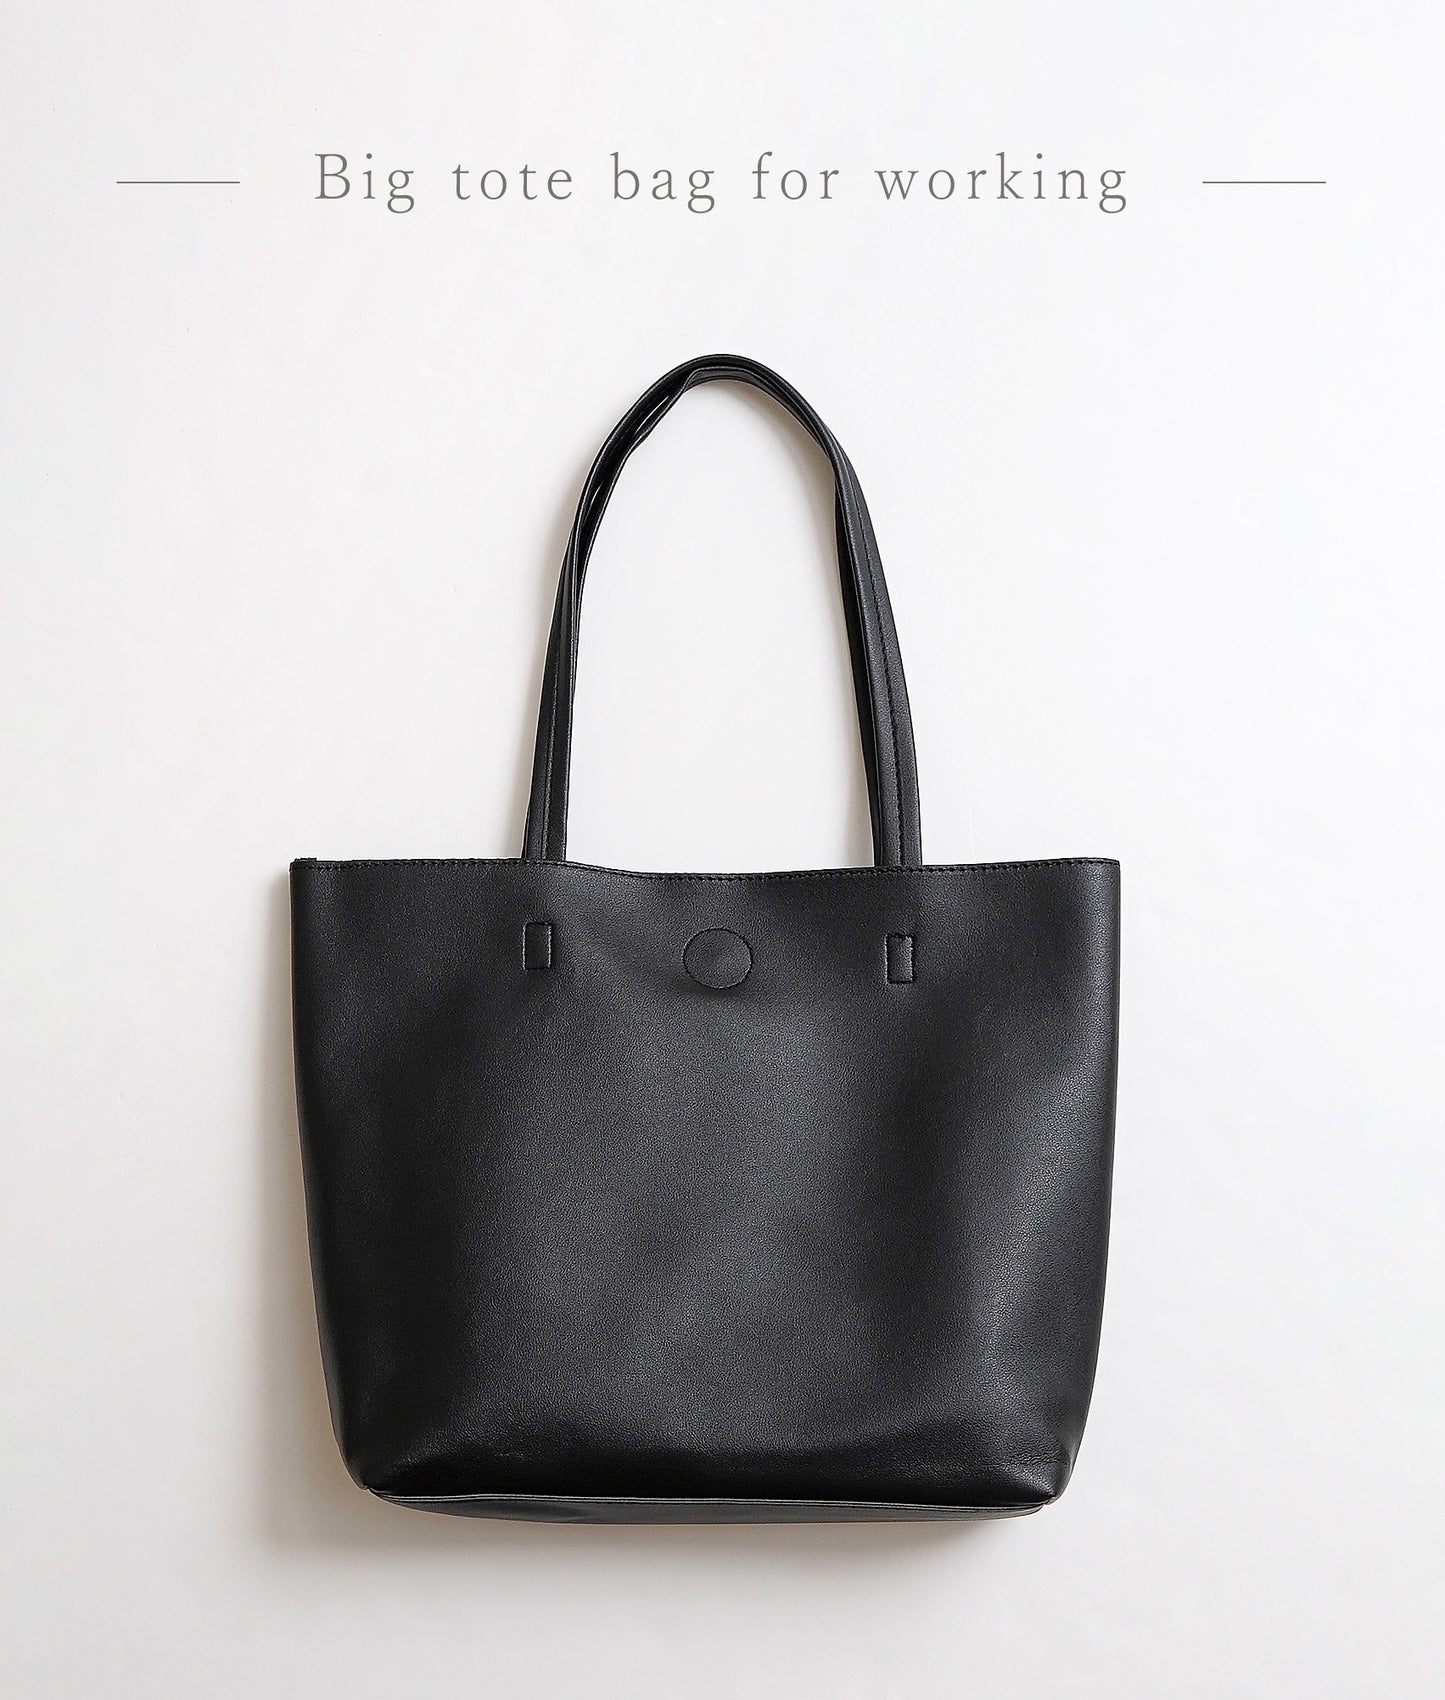 Big tote bag for working